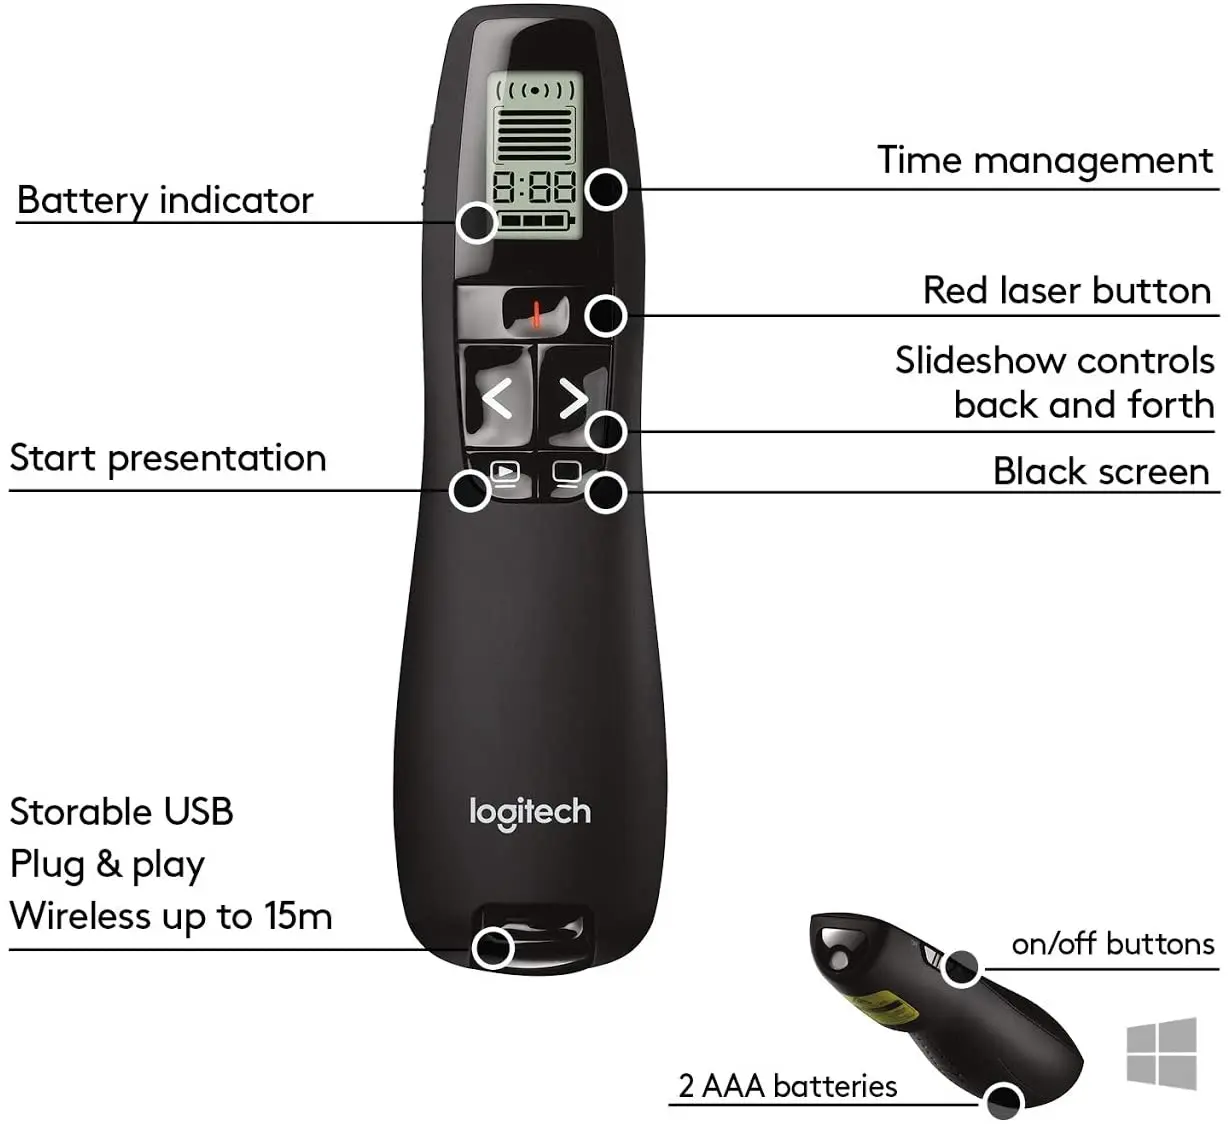 Logitech R800 Laser Presentation Remote With Lcd Display For Time Tracking